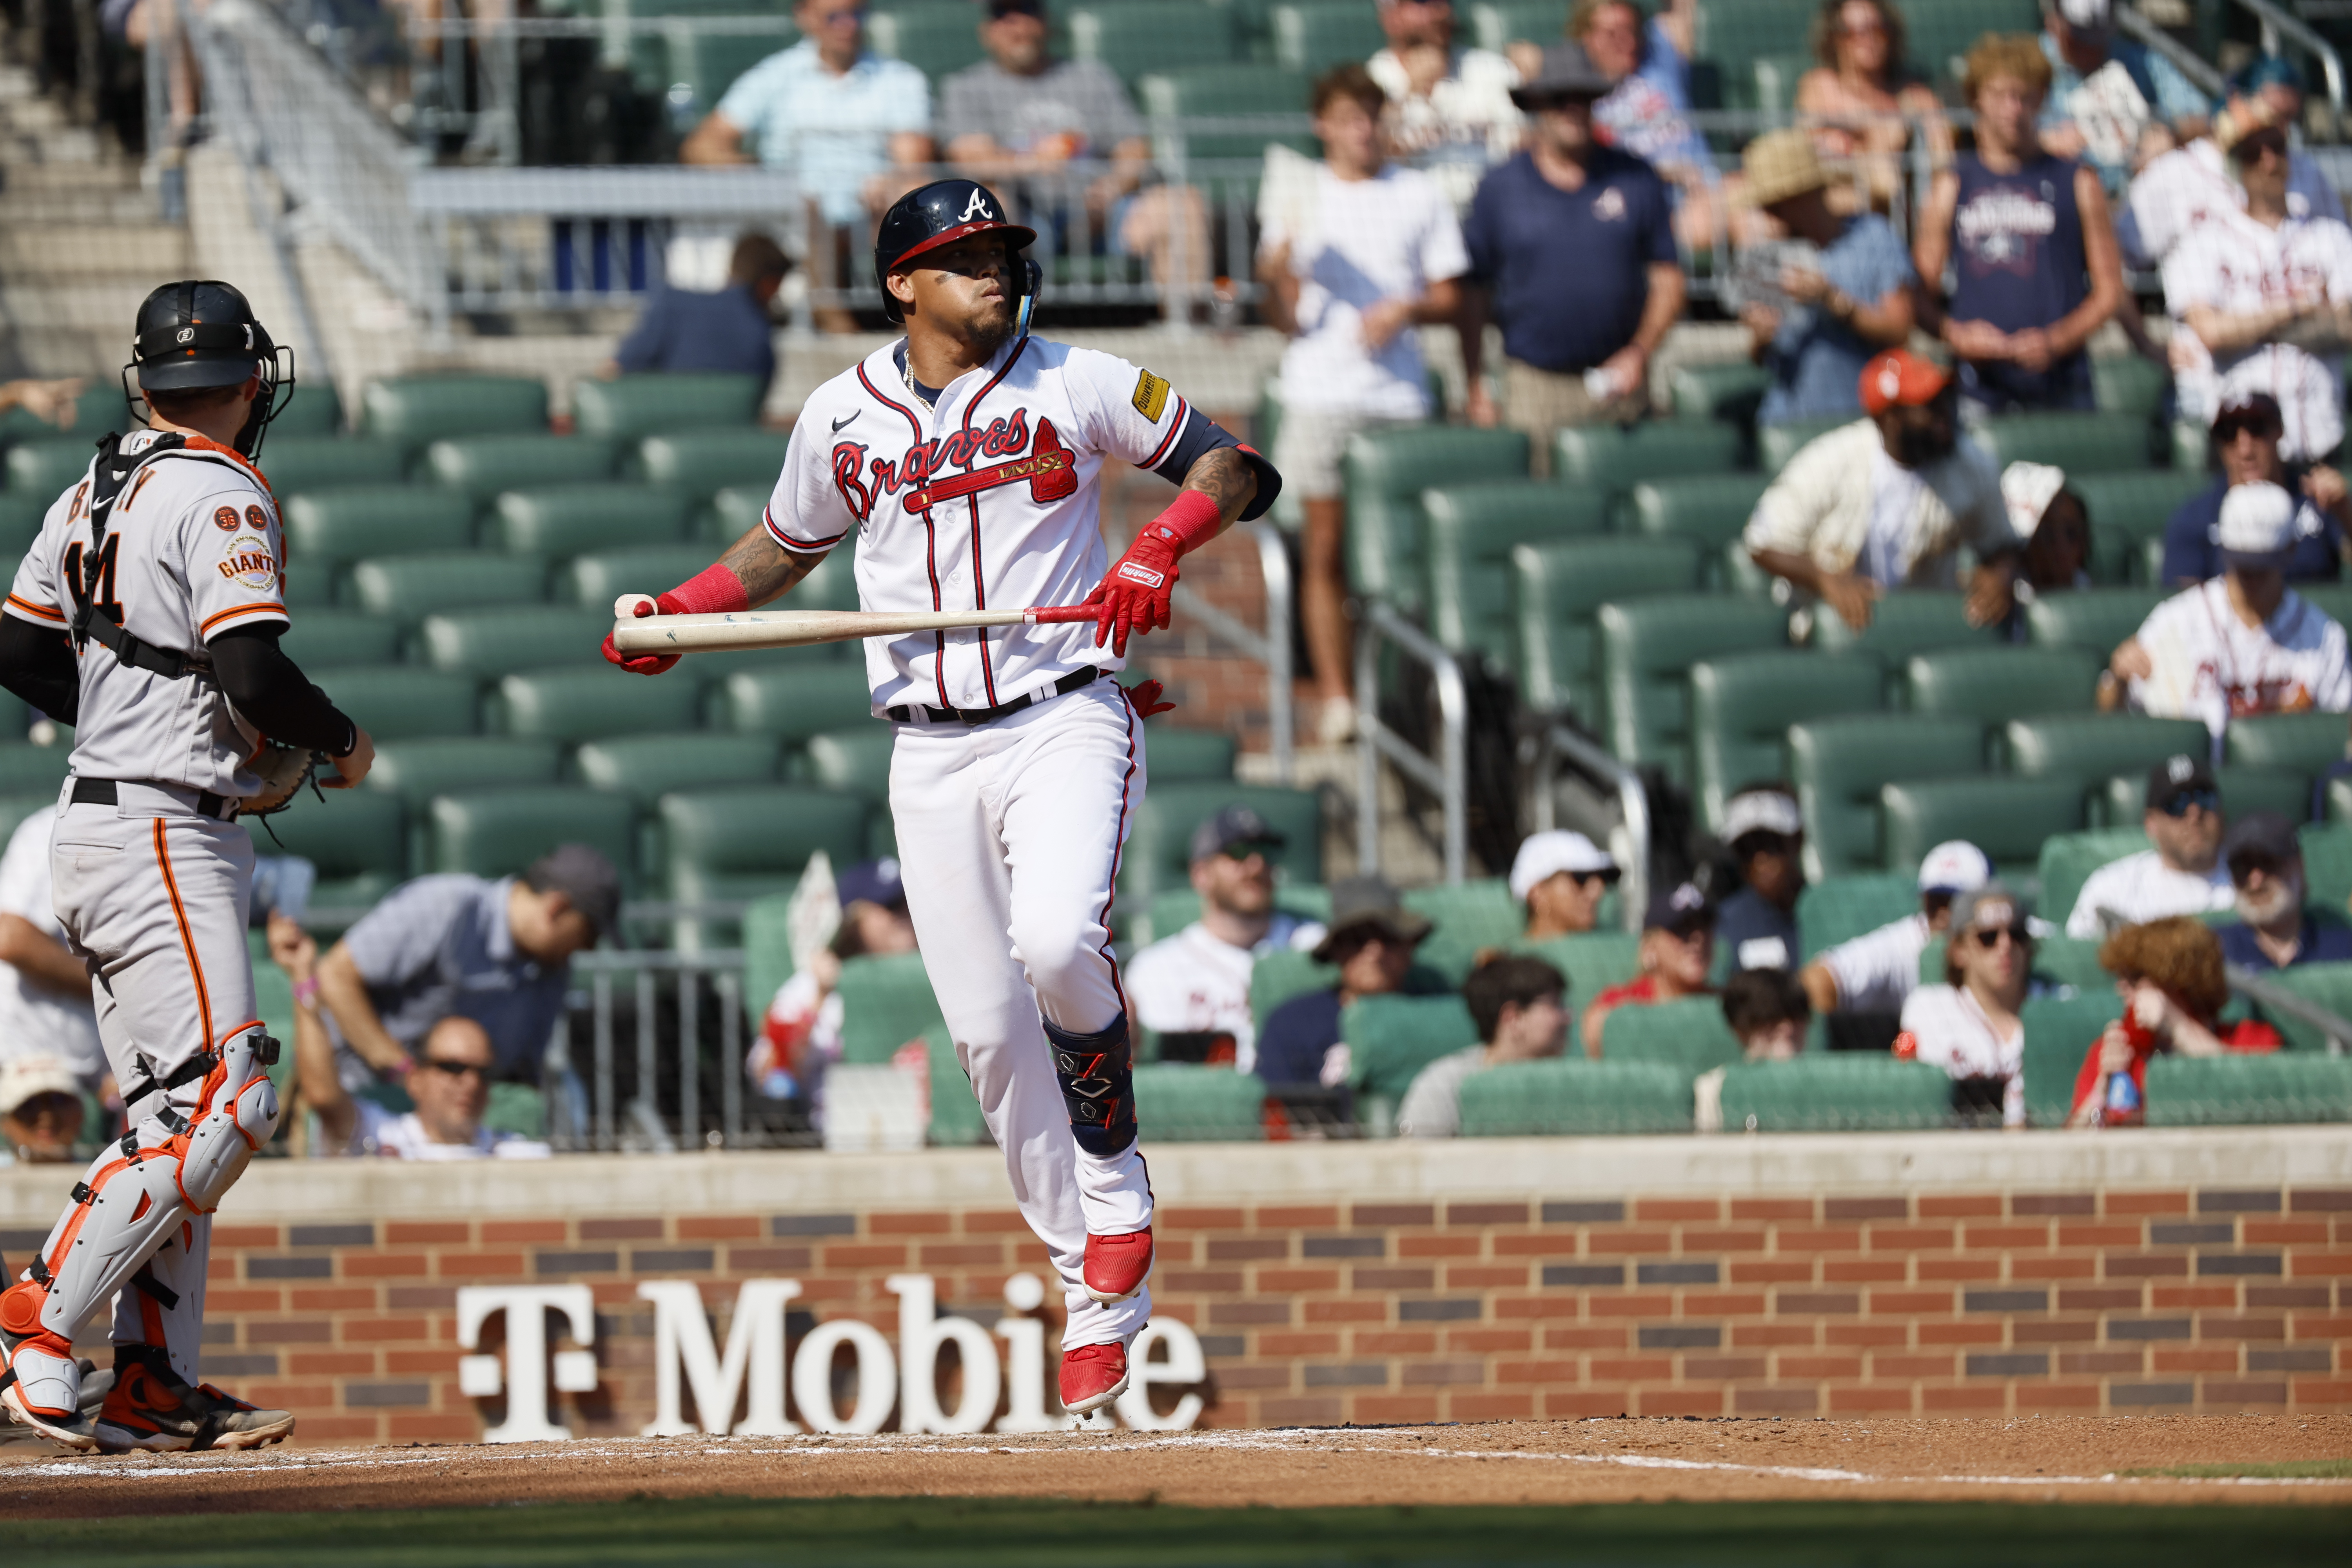 Photos: Braves fall short in series finale vs. Giants